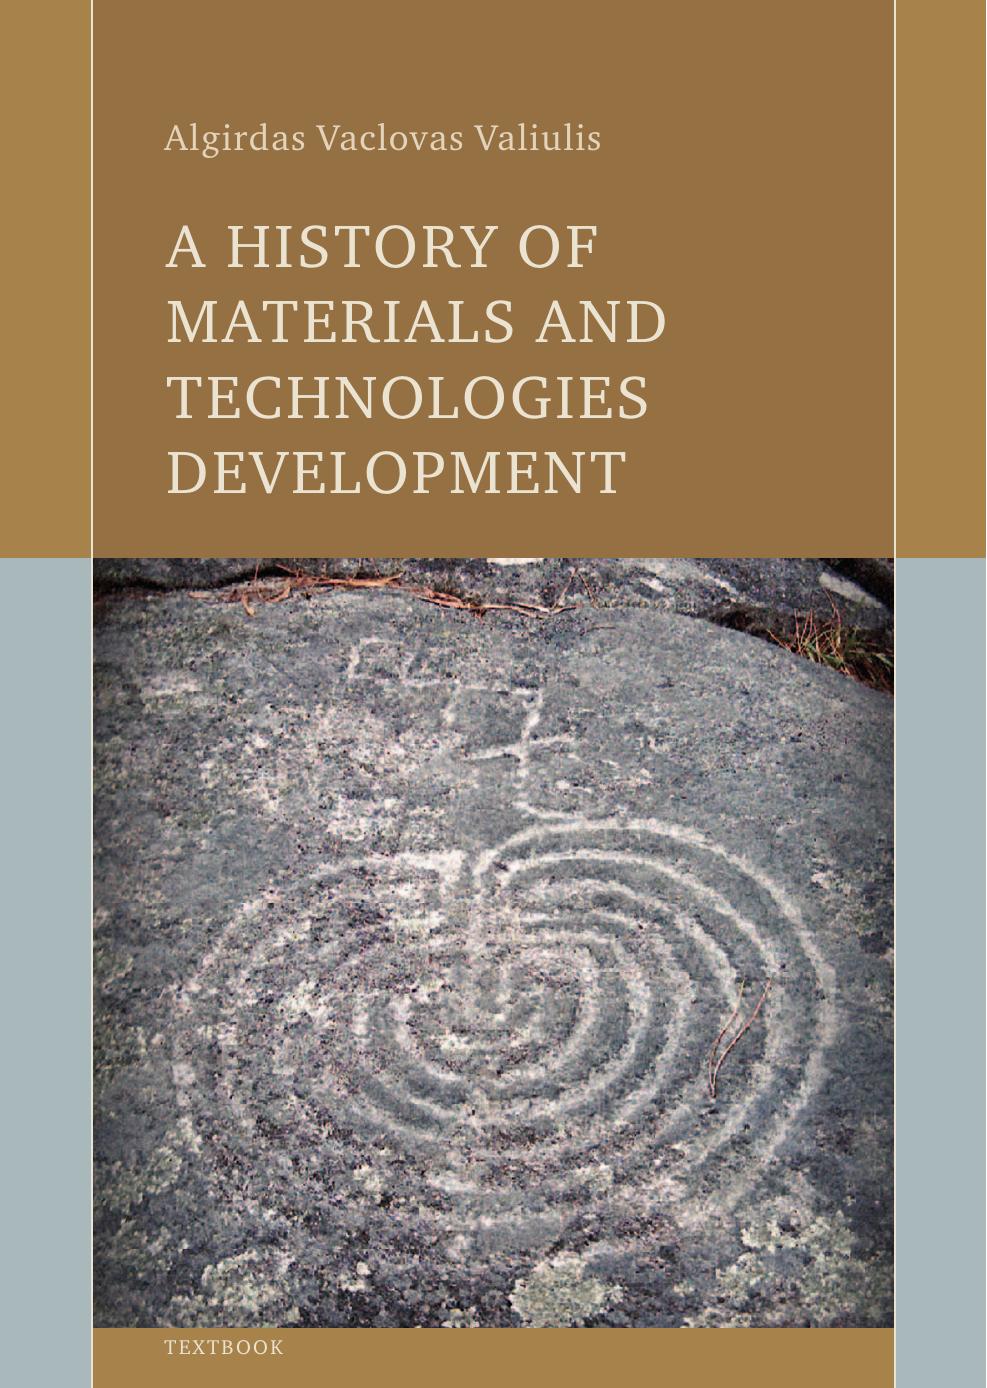 A History of Materials and Technologies Development 2014